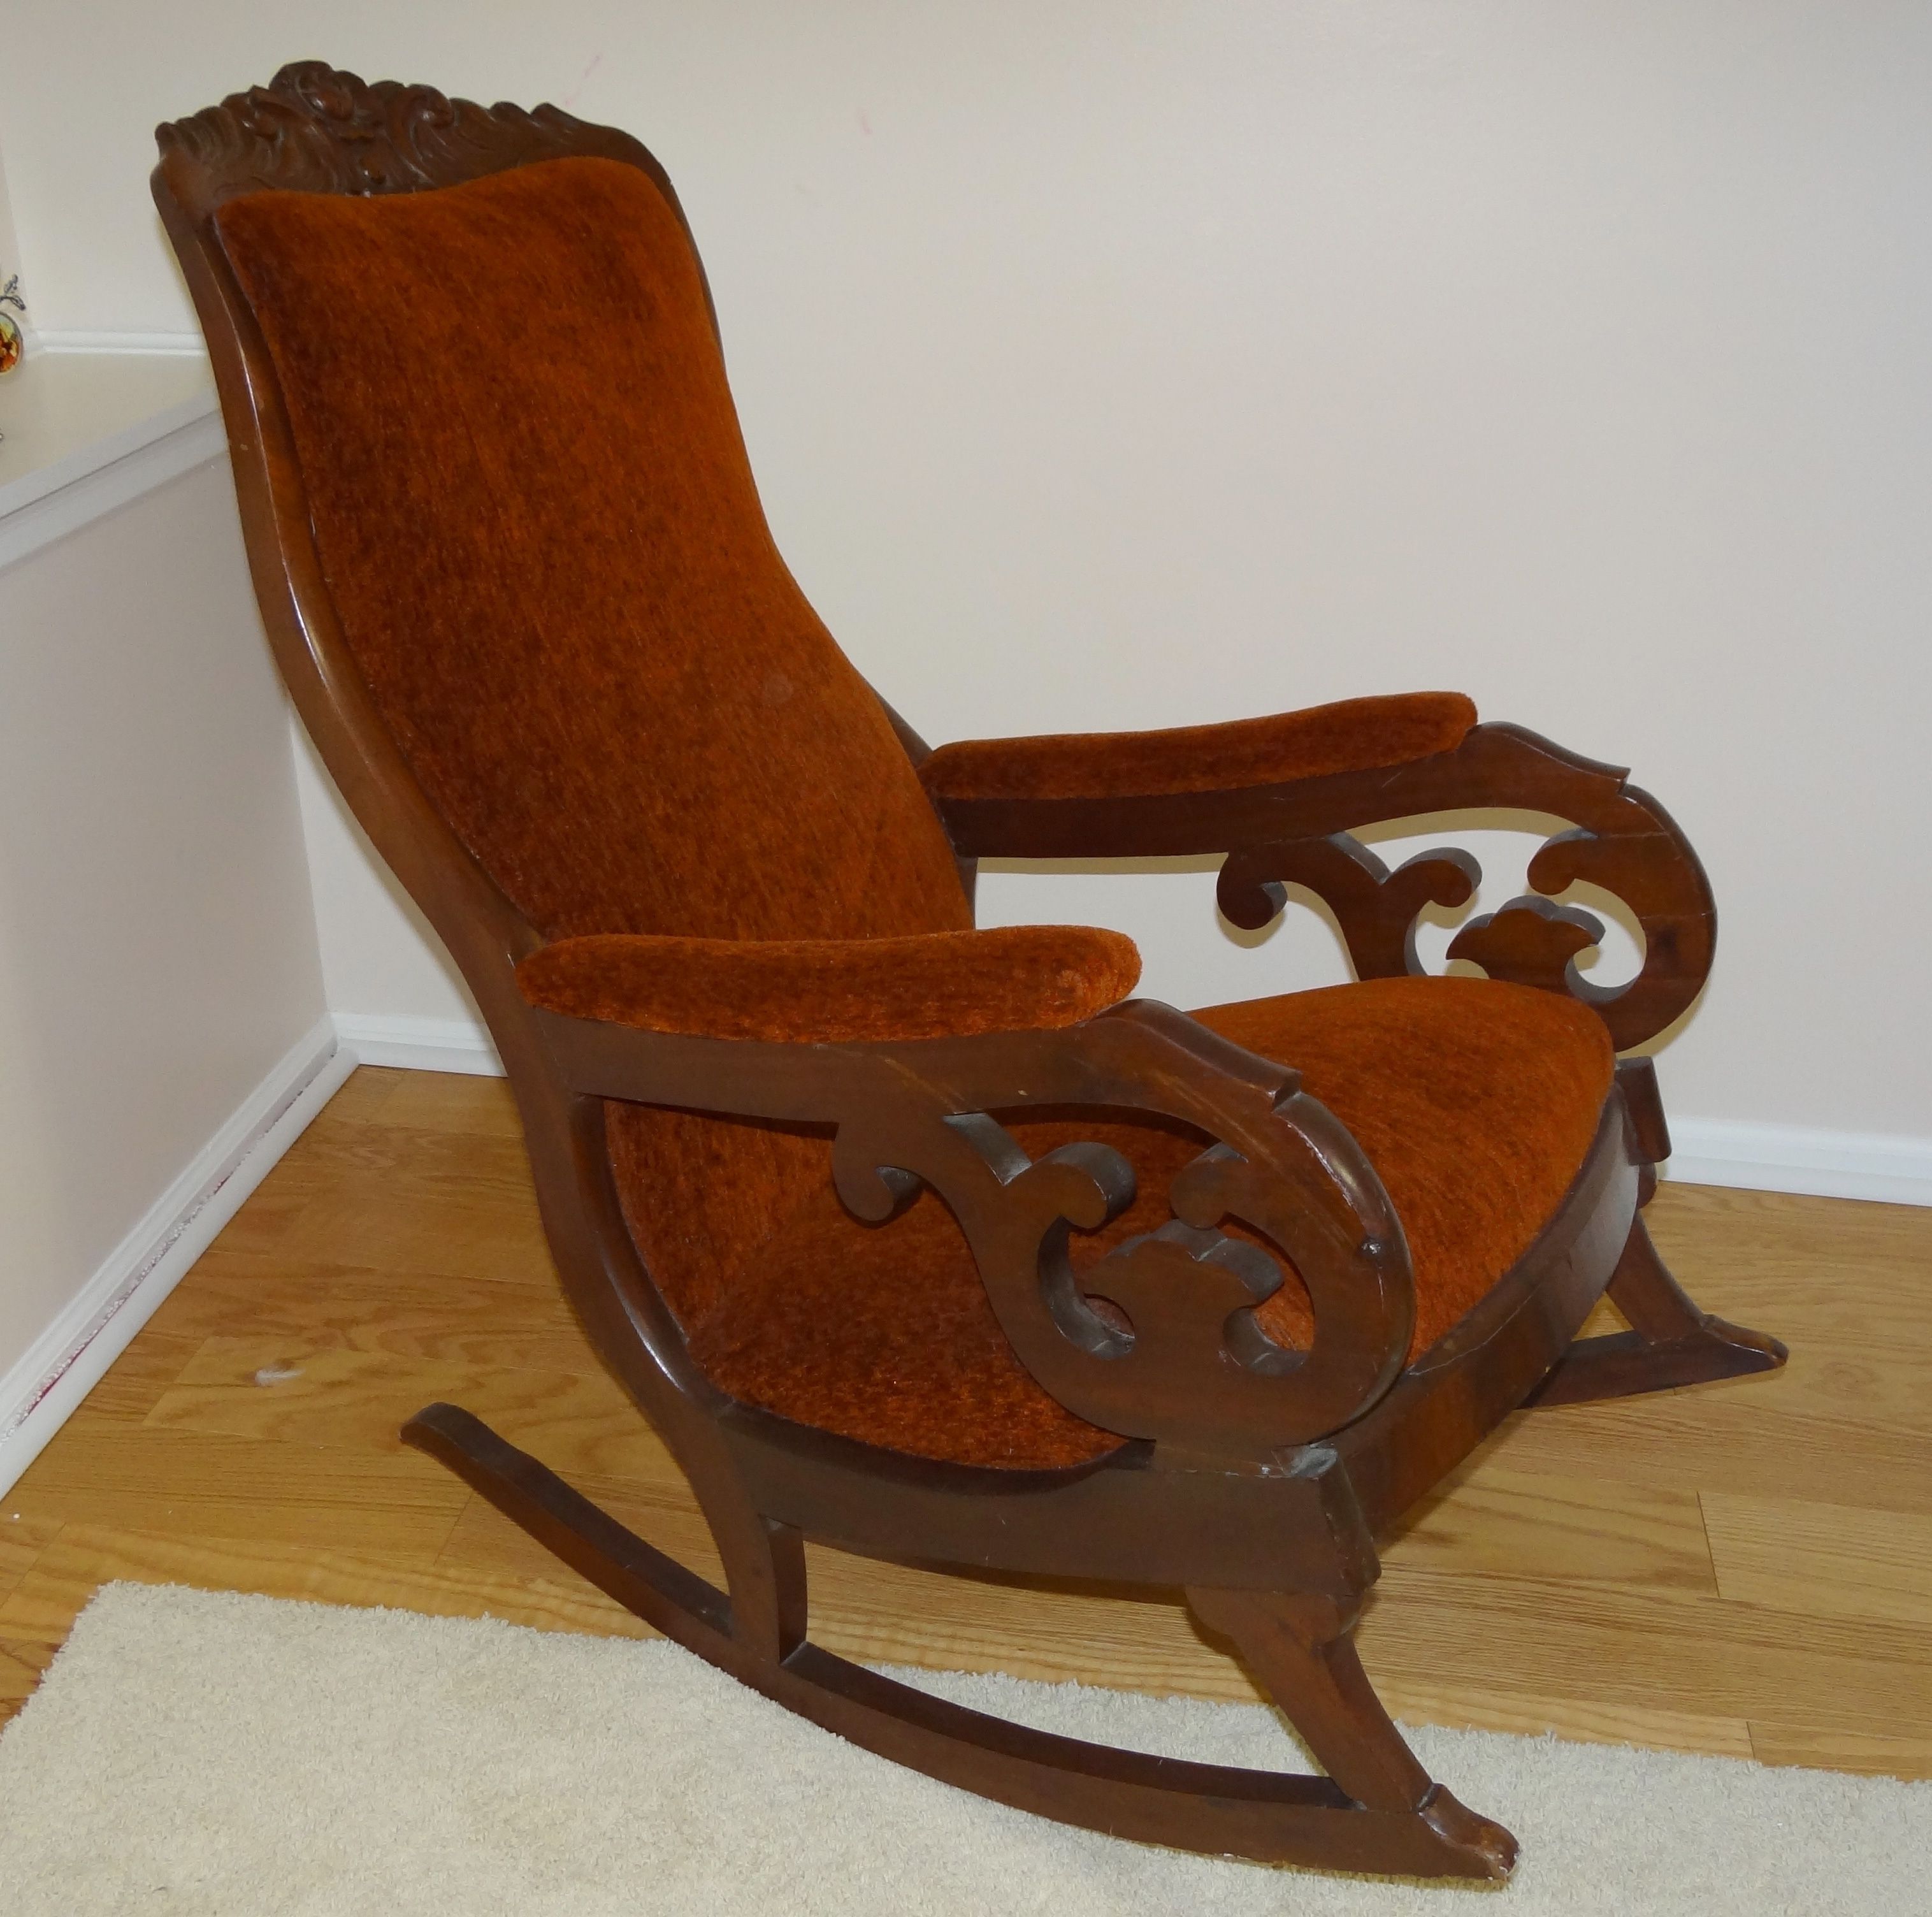 Famous Awesome Old Fashioned Rocking Chair With Furniture Idea Quaqua Intended For Old Fashioned Rocking Chairs (View 5 of 15)